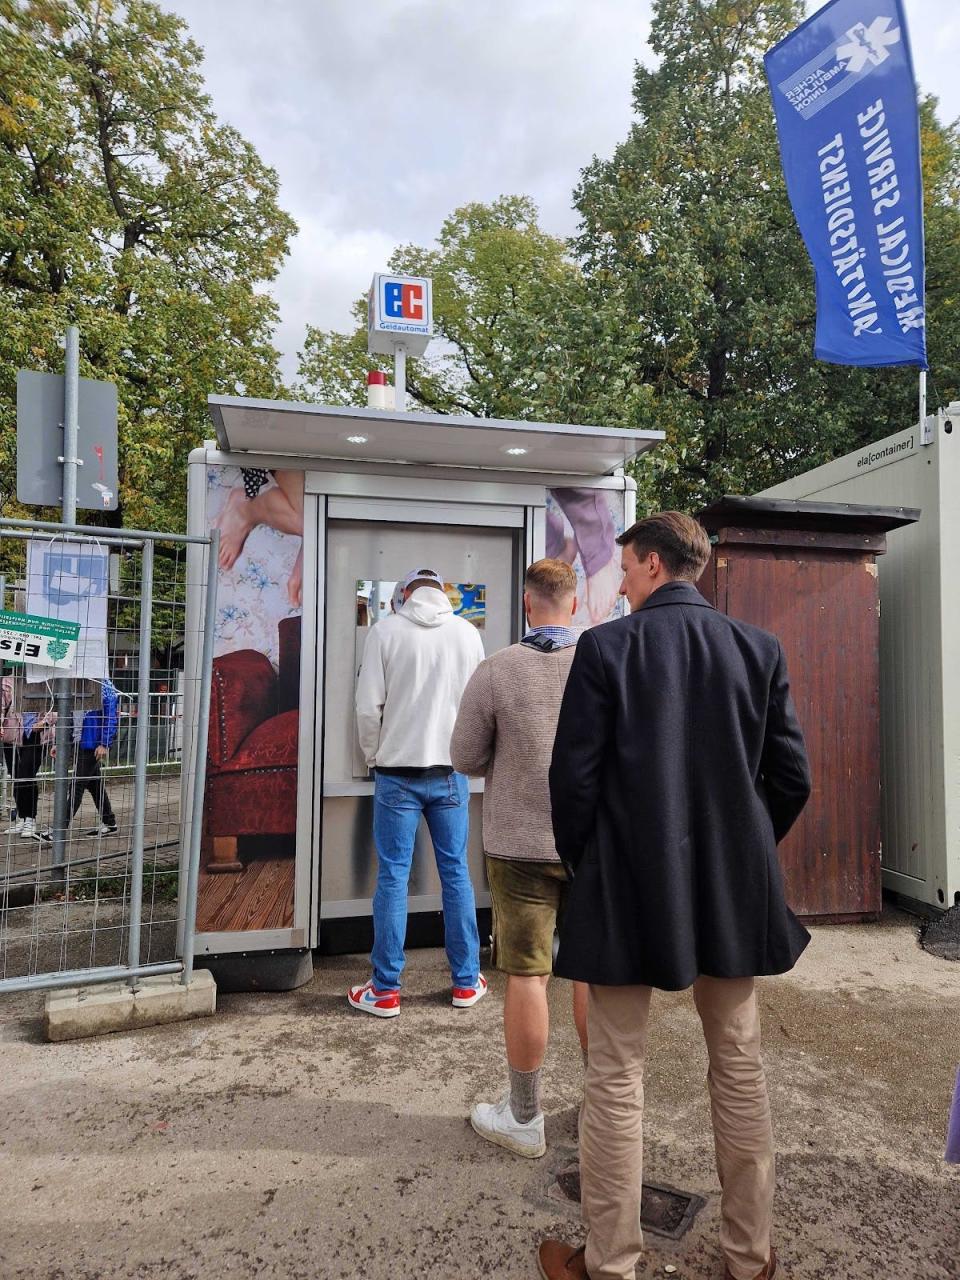 ATM at Oktoberfest with three men waiting to withdraw